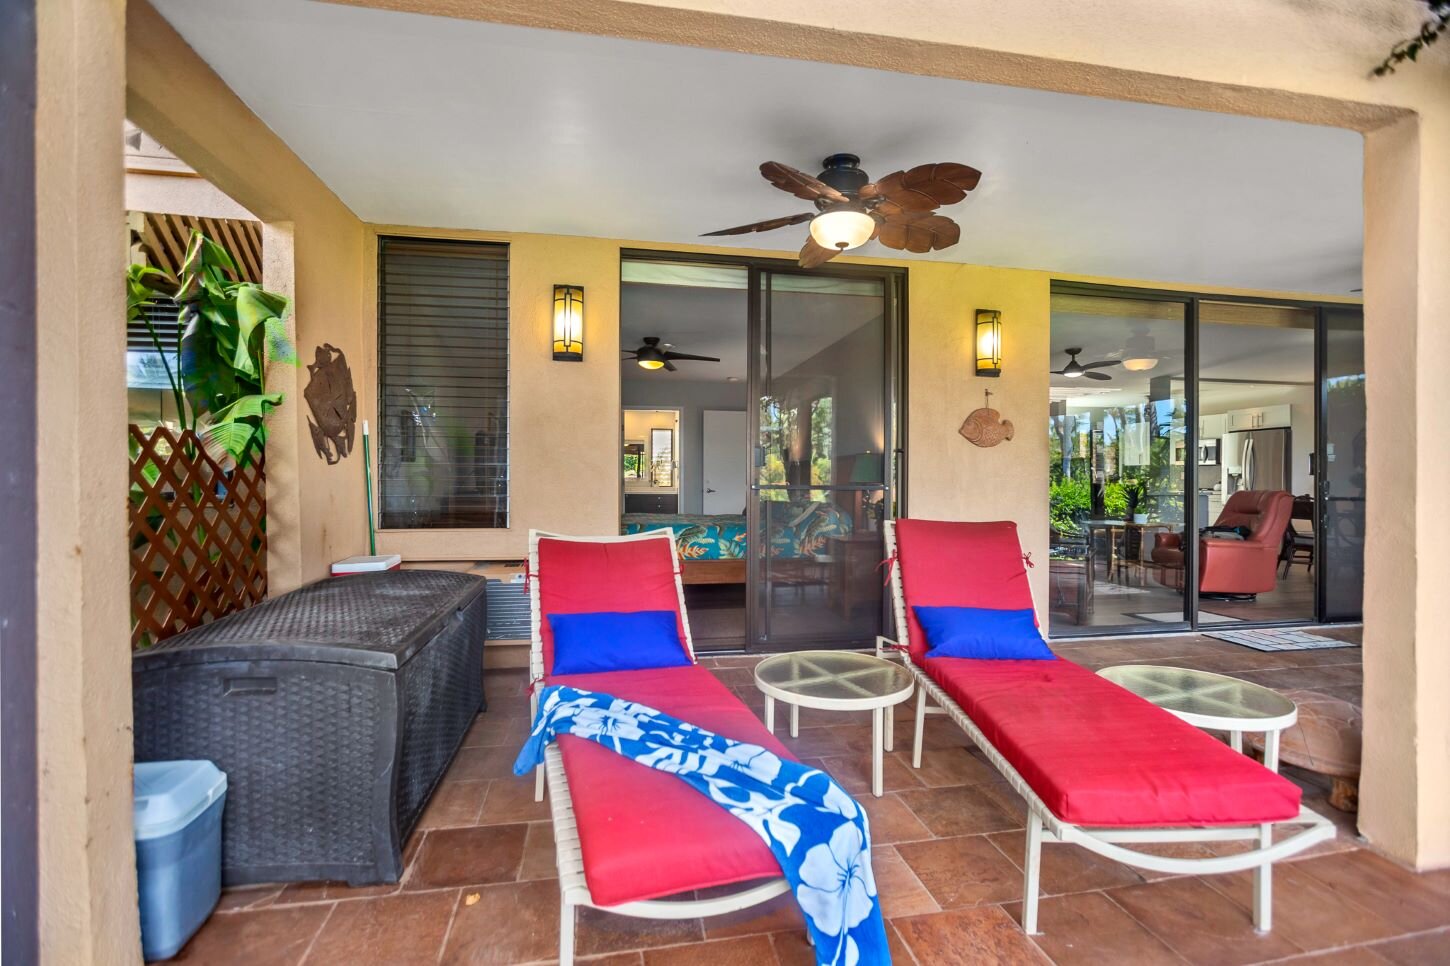 Relax on our comfortable lounge chairs in this mostly private lanai.